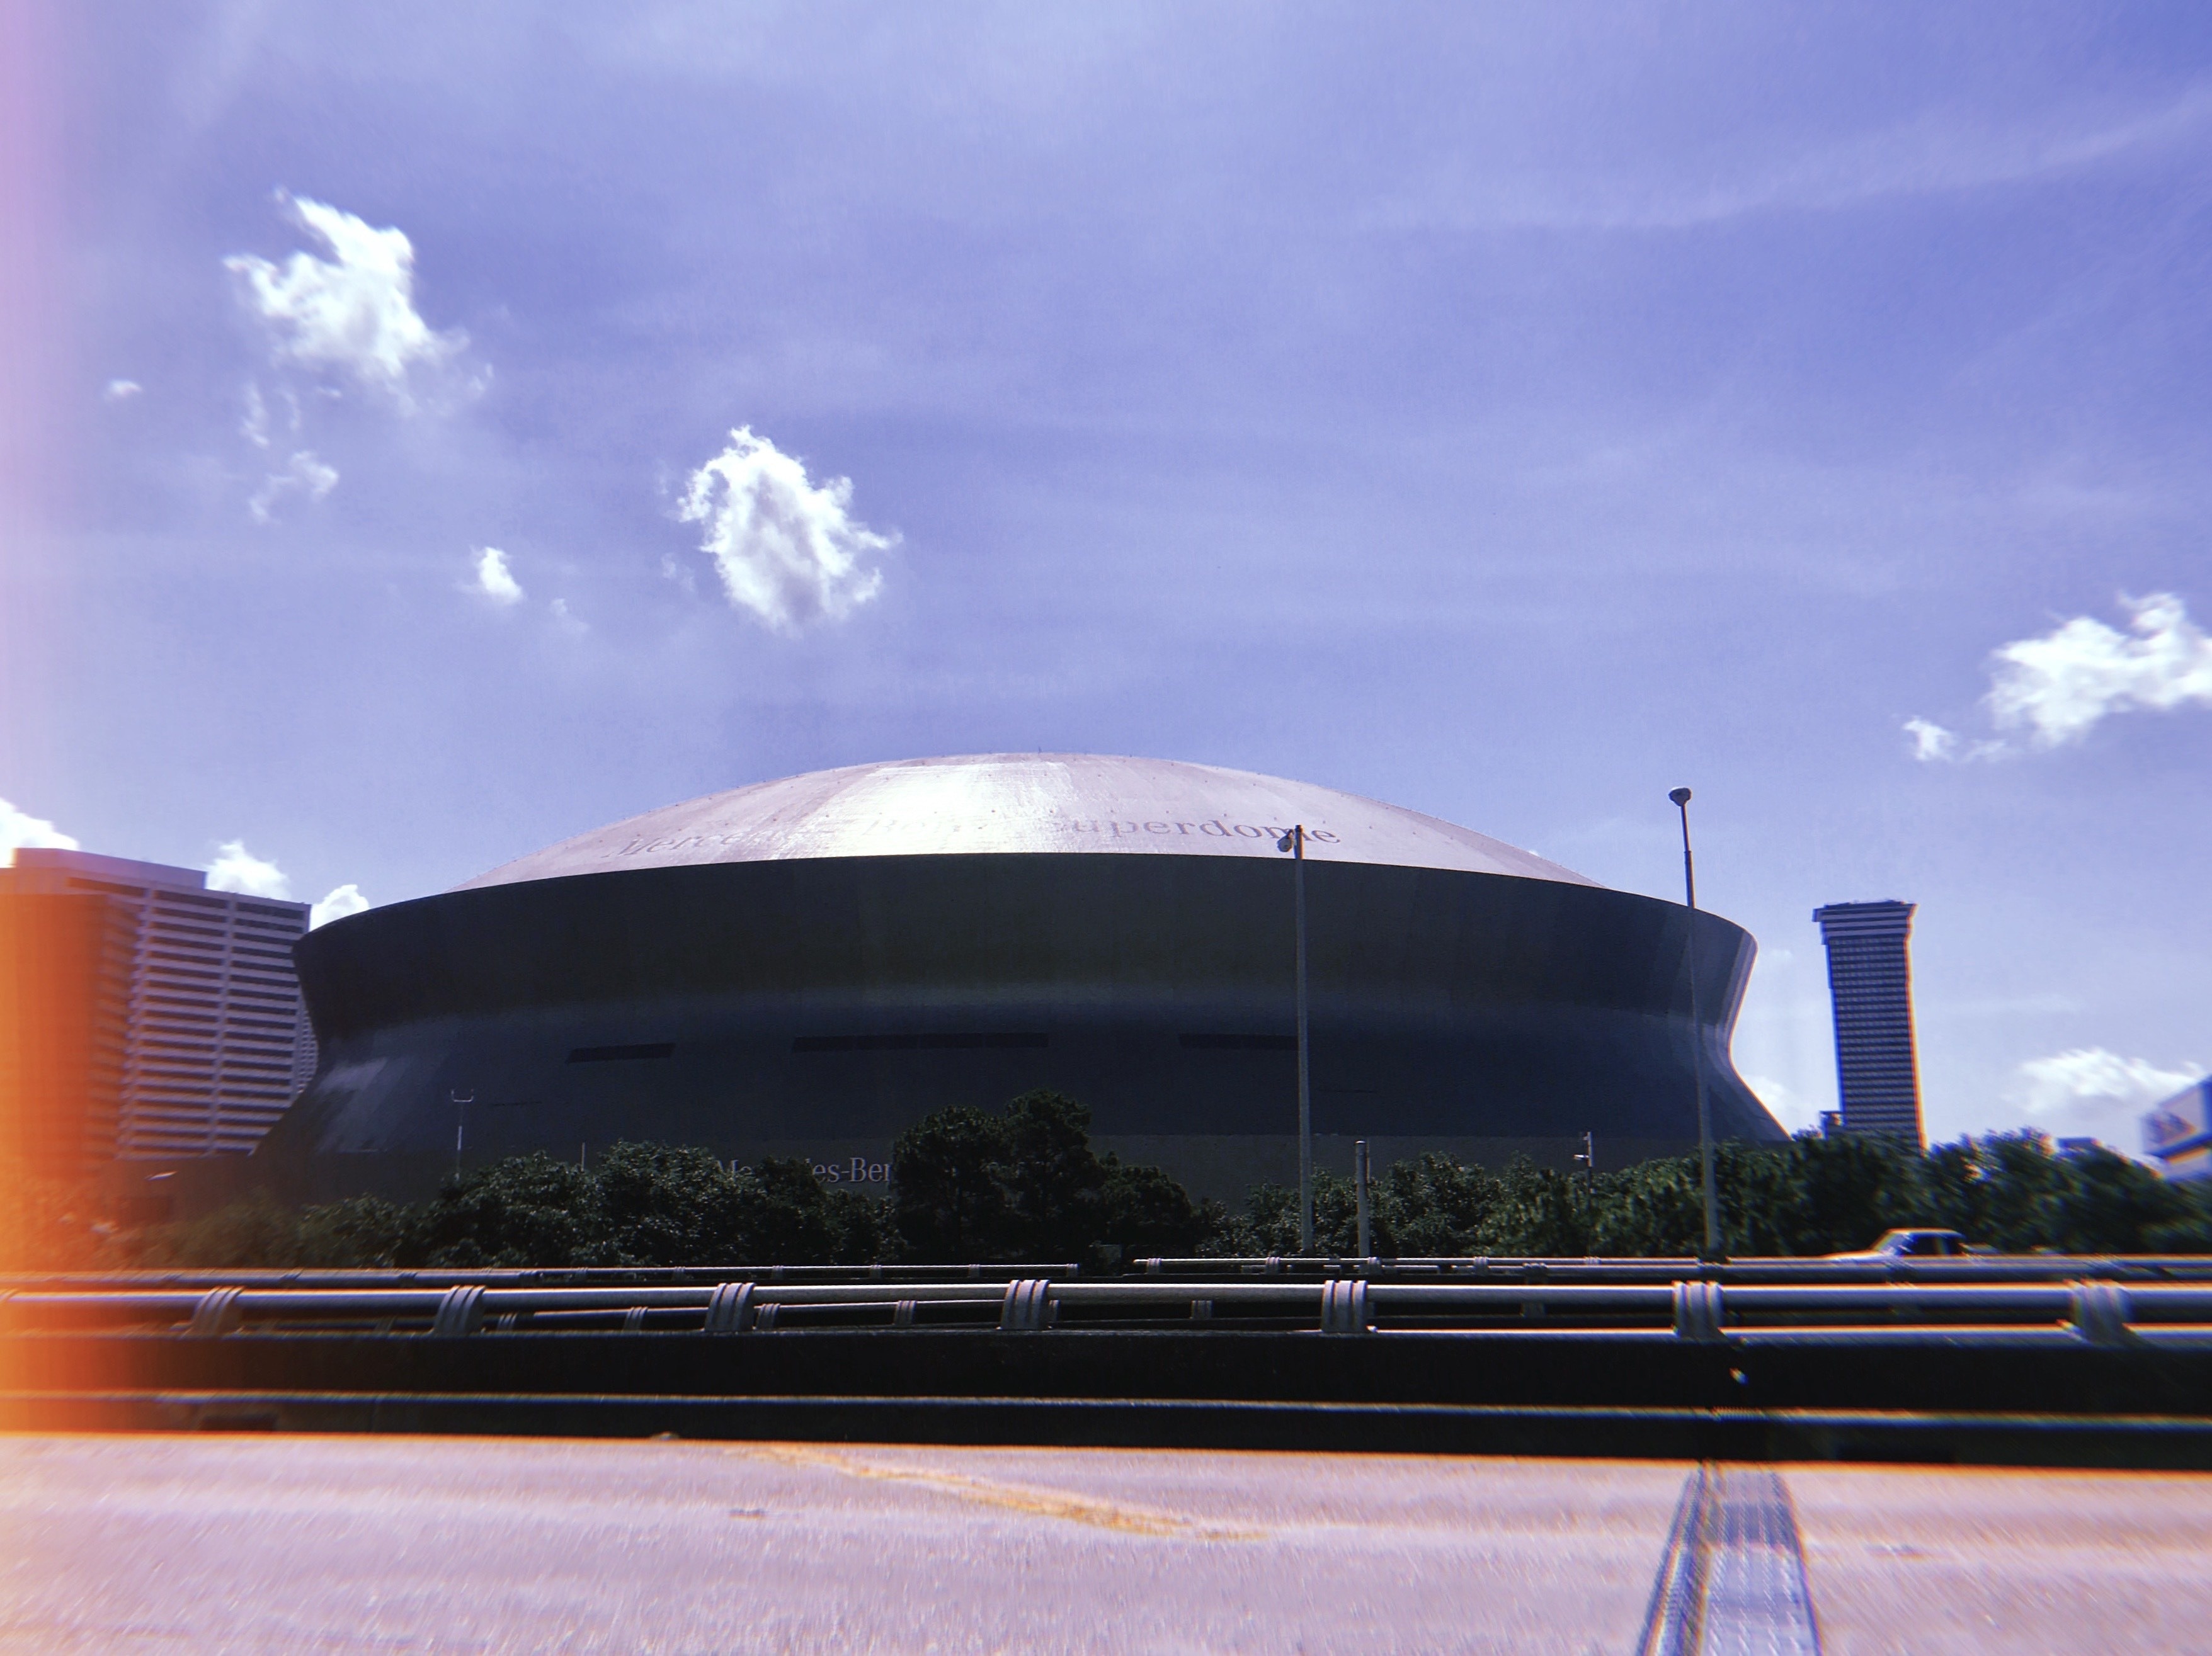 The Superdome is undeniably one of New Orleans’s most important and iconic venues – from hosting Beyoncé’s spell-binding Super Bowl XLVII Halftime show to being a place of refuge during the devasting  Hurricane Katrina, it is a building that has and continues to contribute to the historical fabric of this city. #Culture #Superdome #NewOrleans #Louisiana #UrbanExplorer #Travel